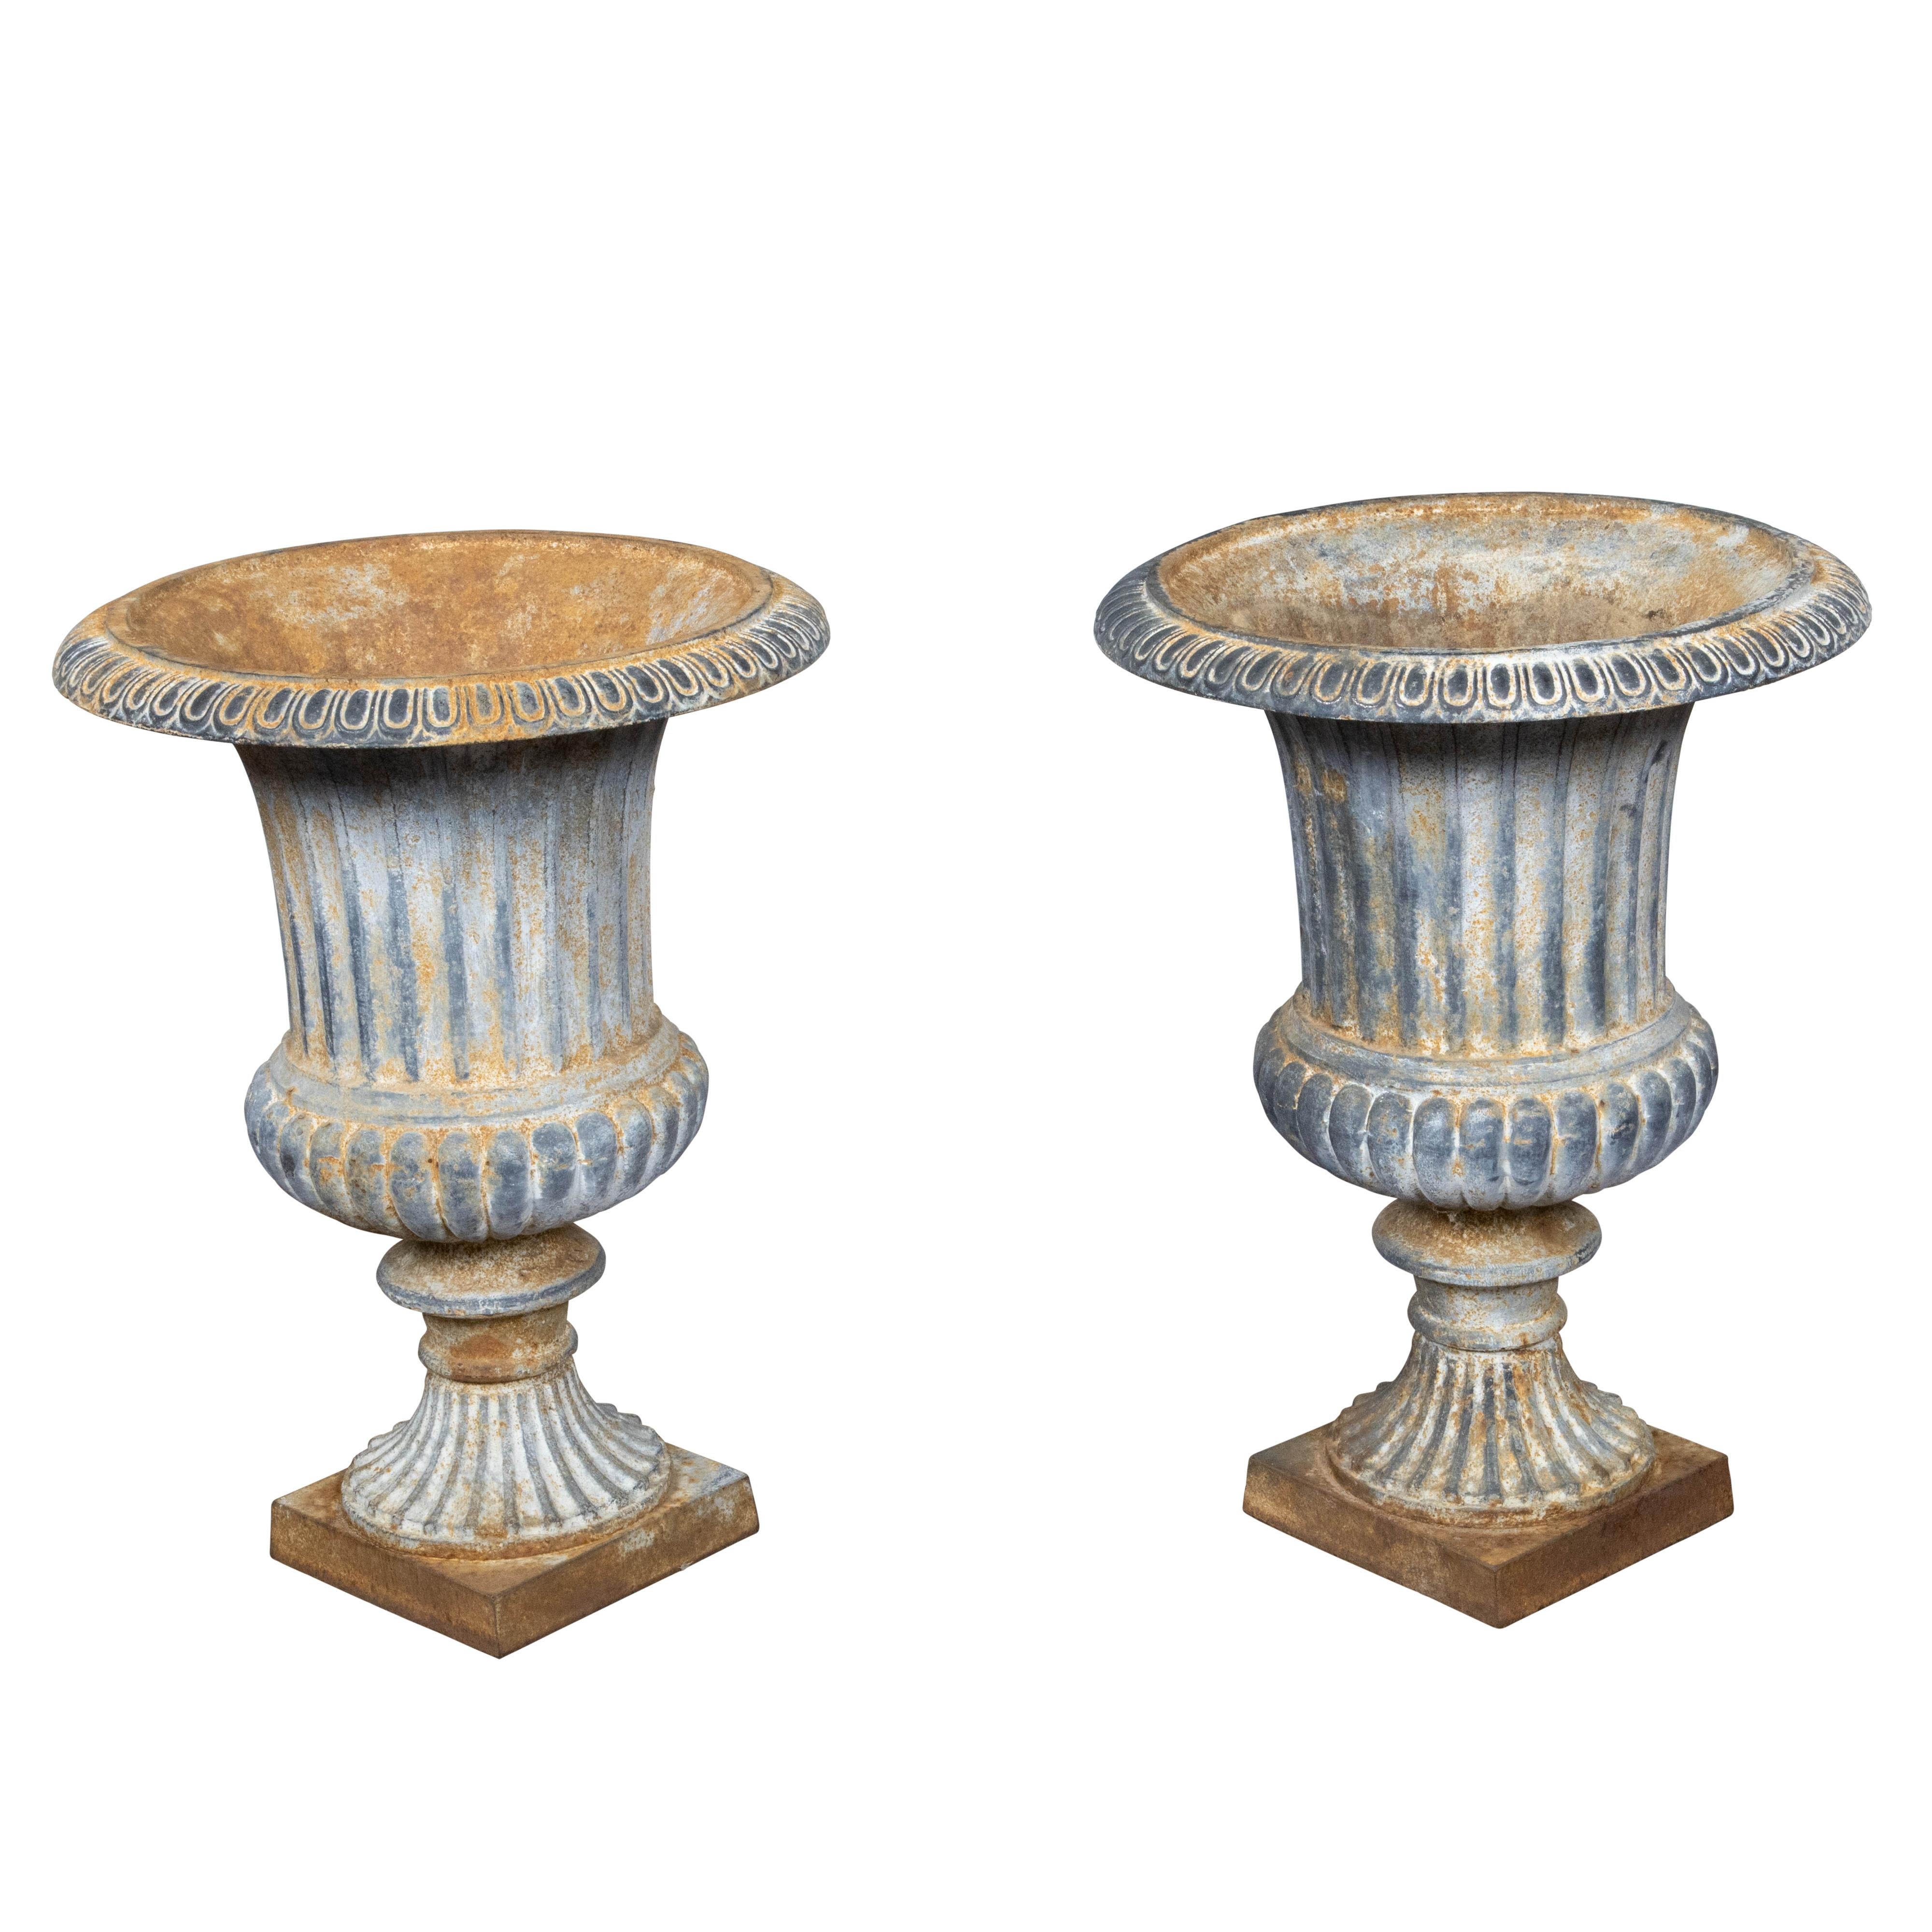 Pair of Turn of the Century French Medici Urn Cast Iron Planters with Patina For Sale 1